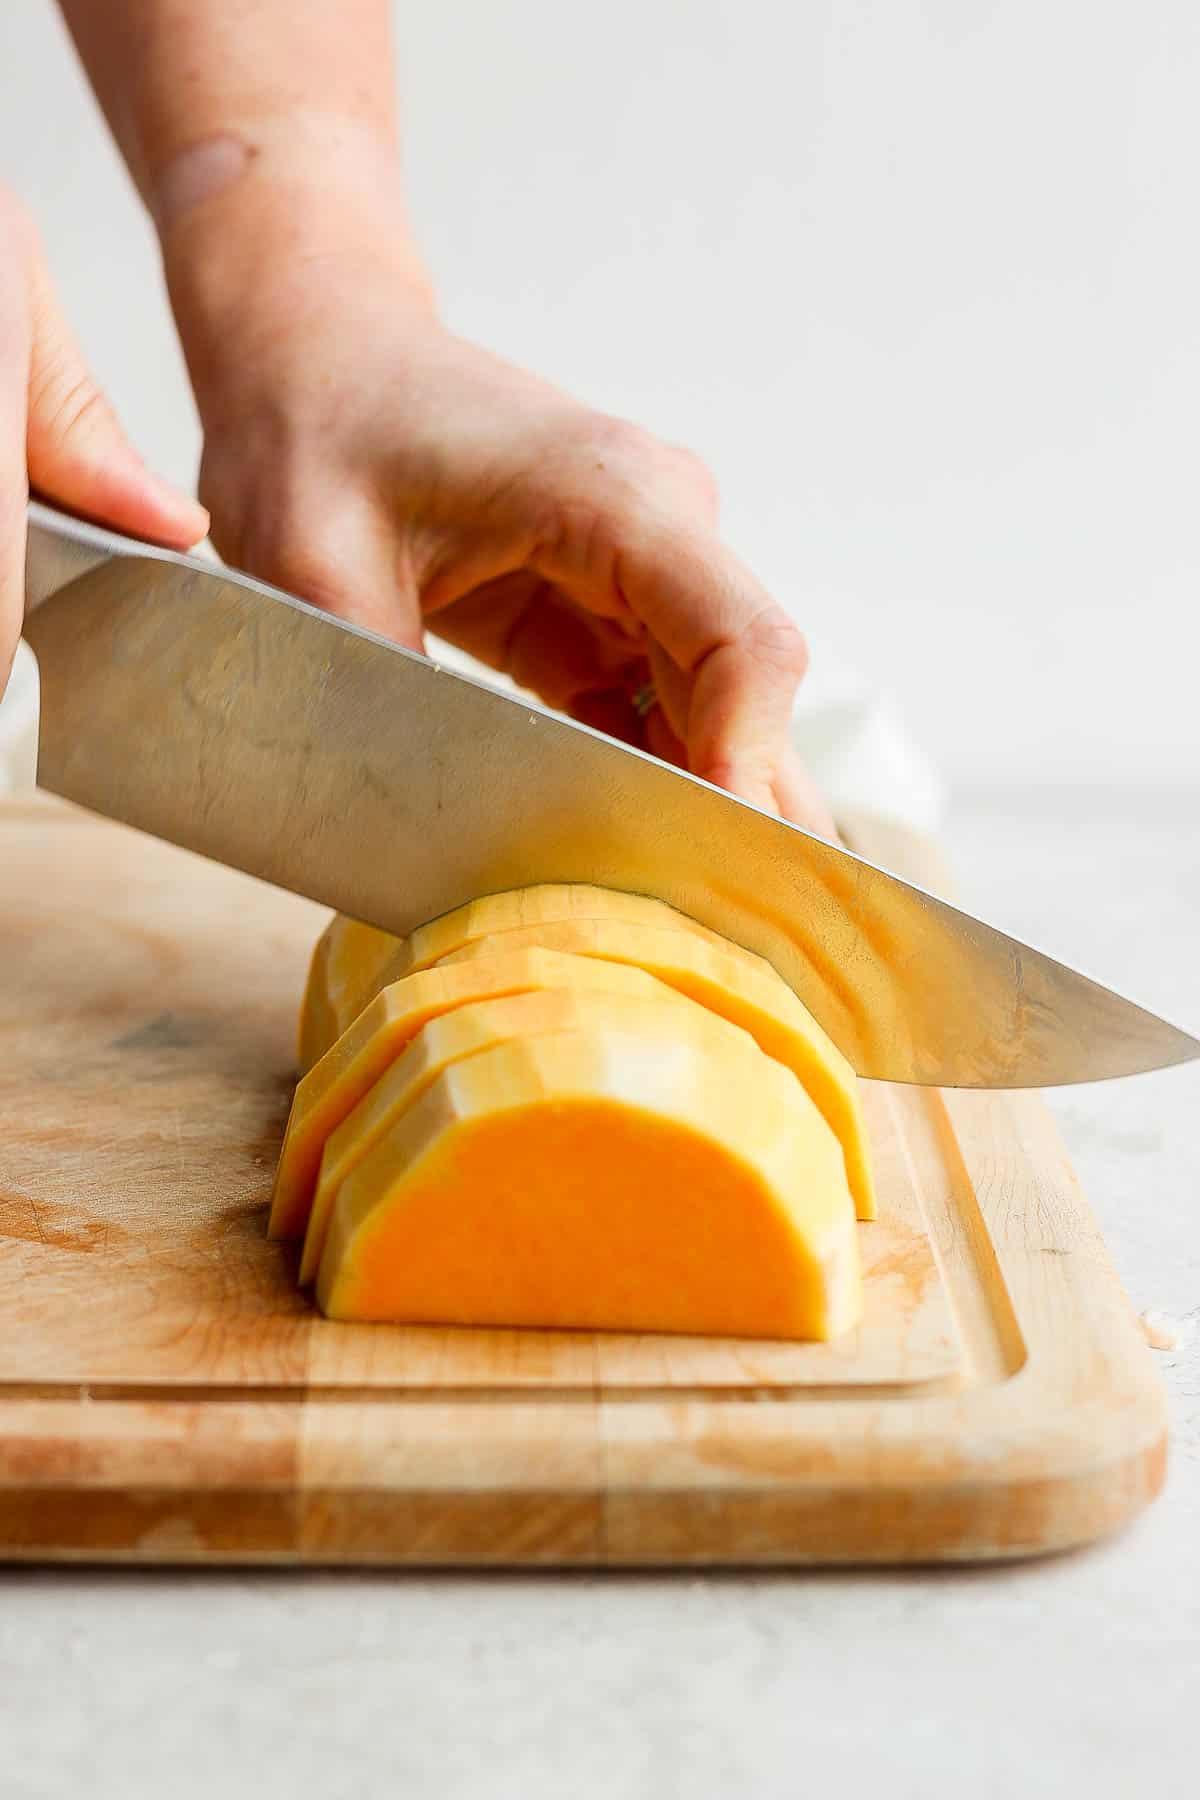 A section of butternut squash being cut into slices.